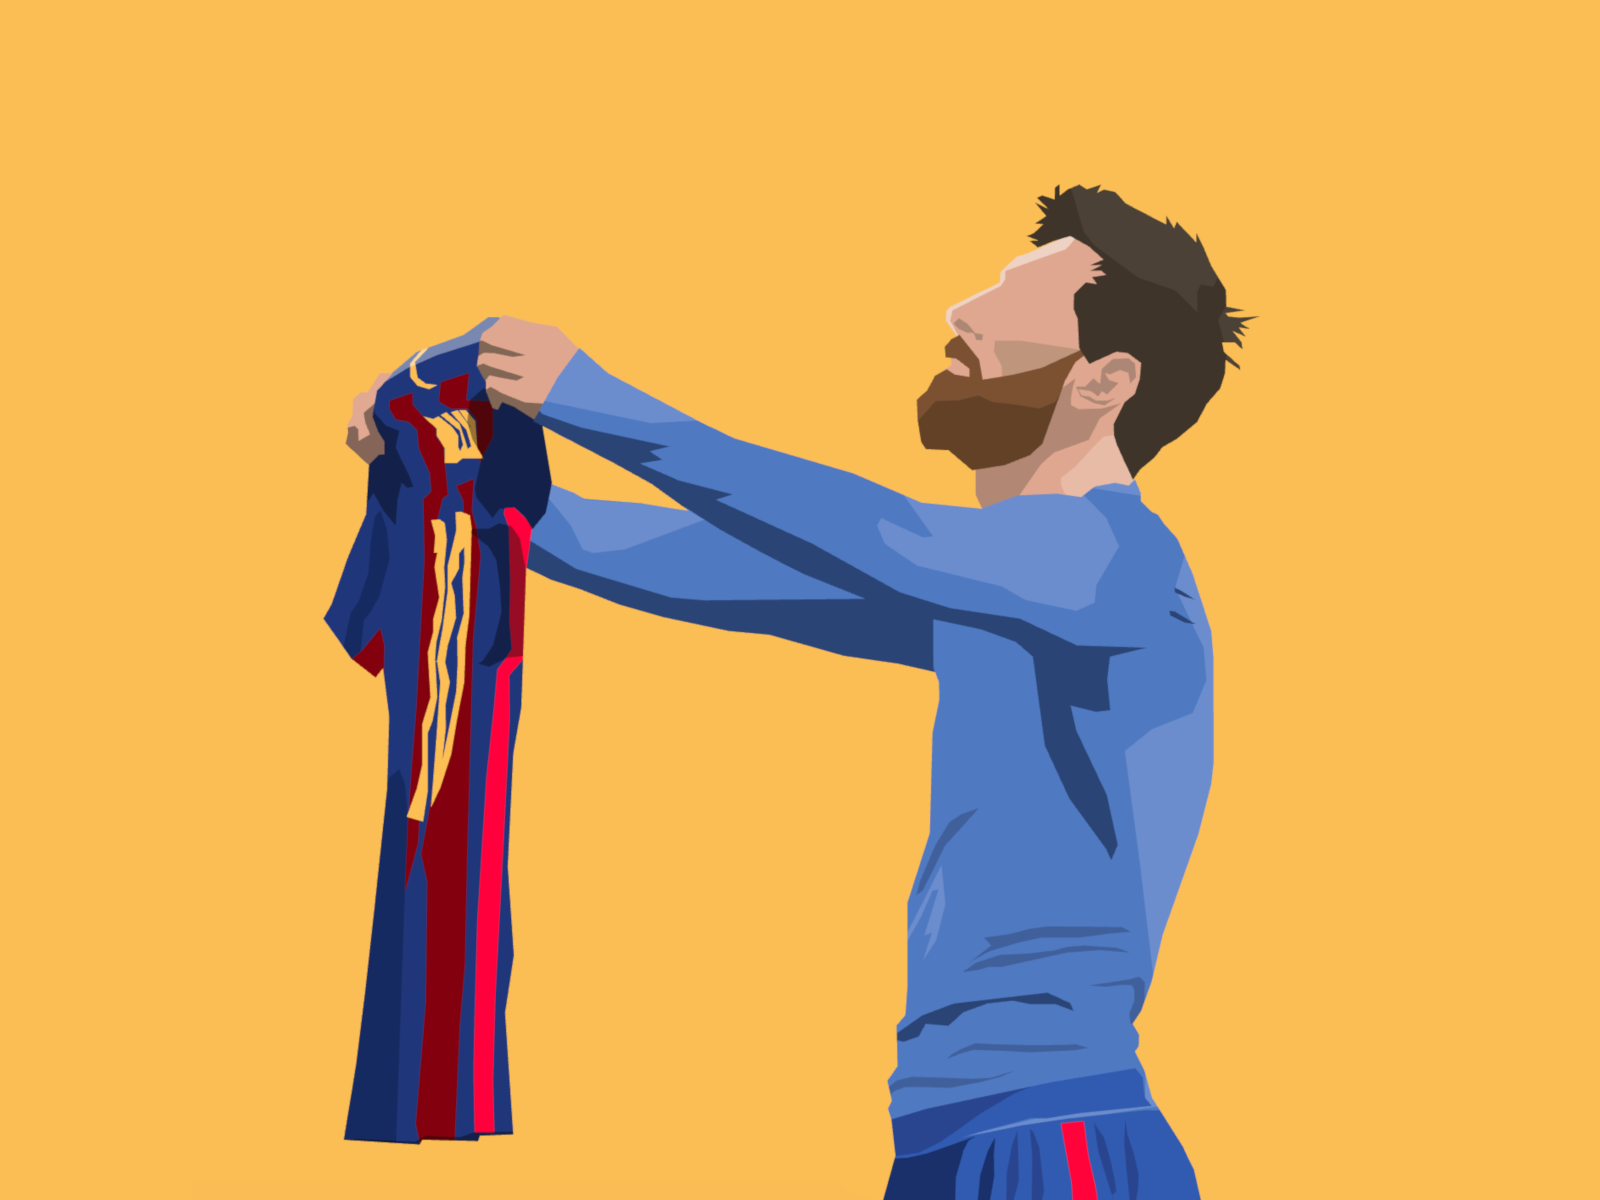 Polygonal cartoon depicting Leo Messi showing his jersey to a non-visible crowd